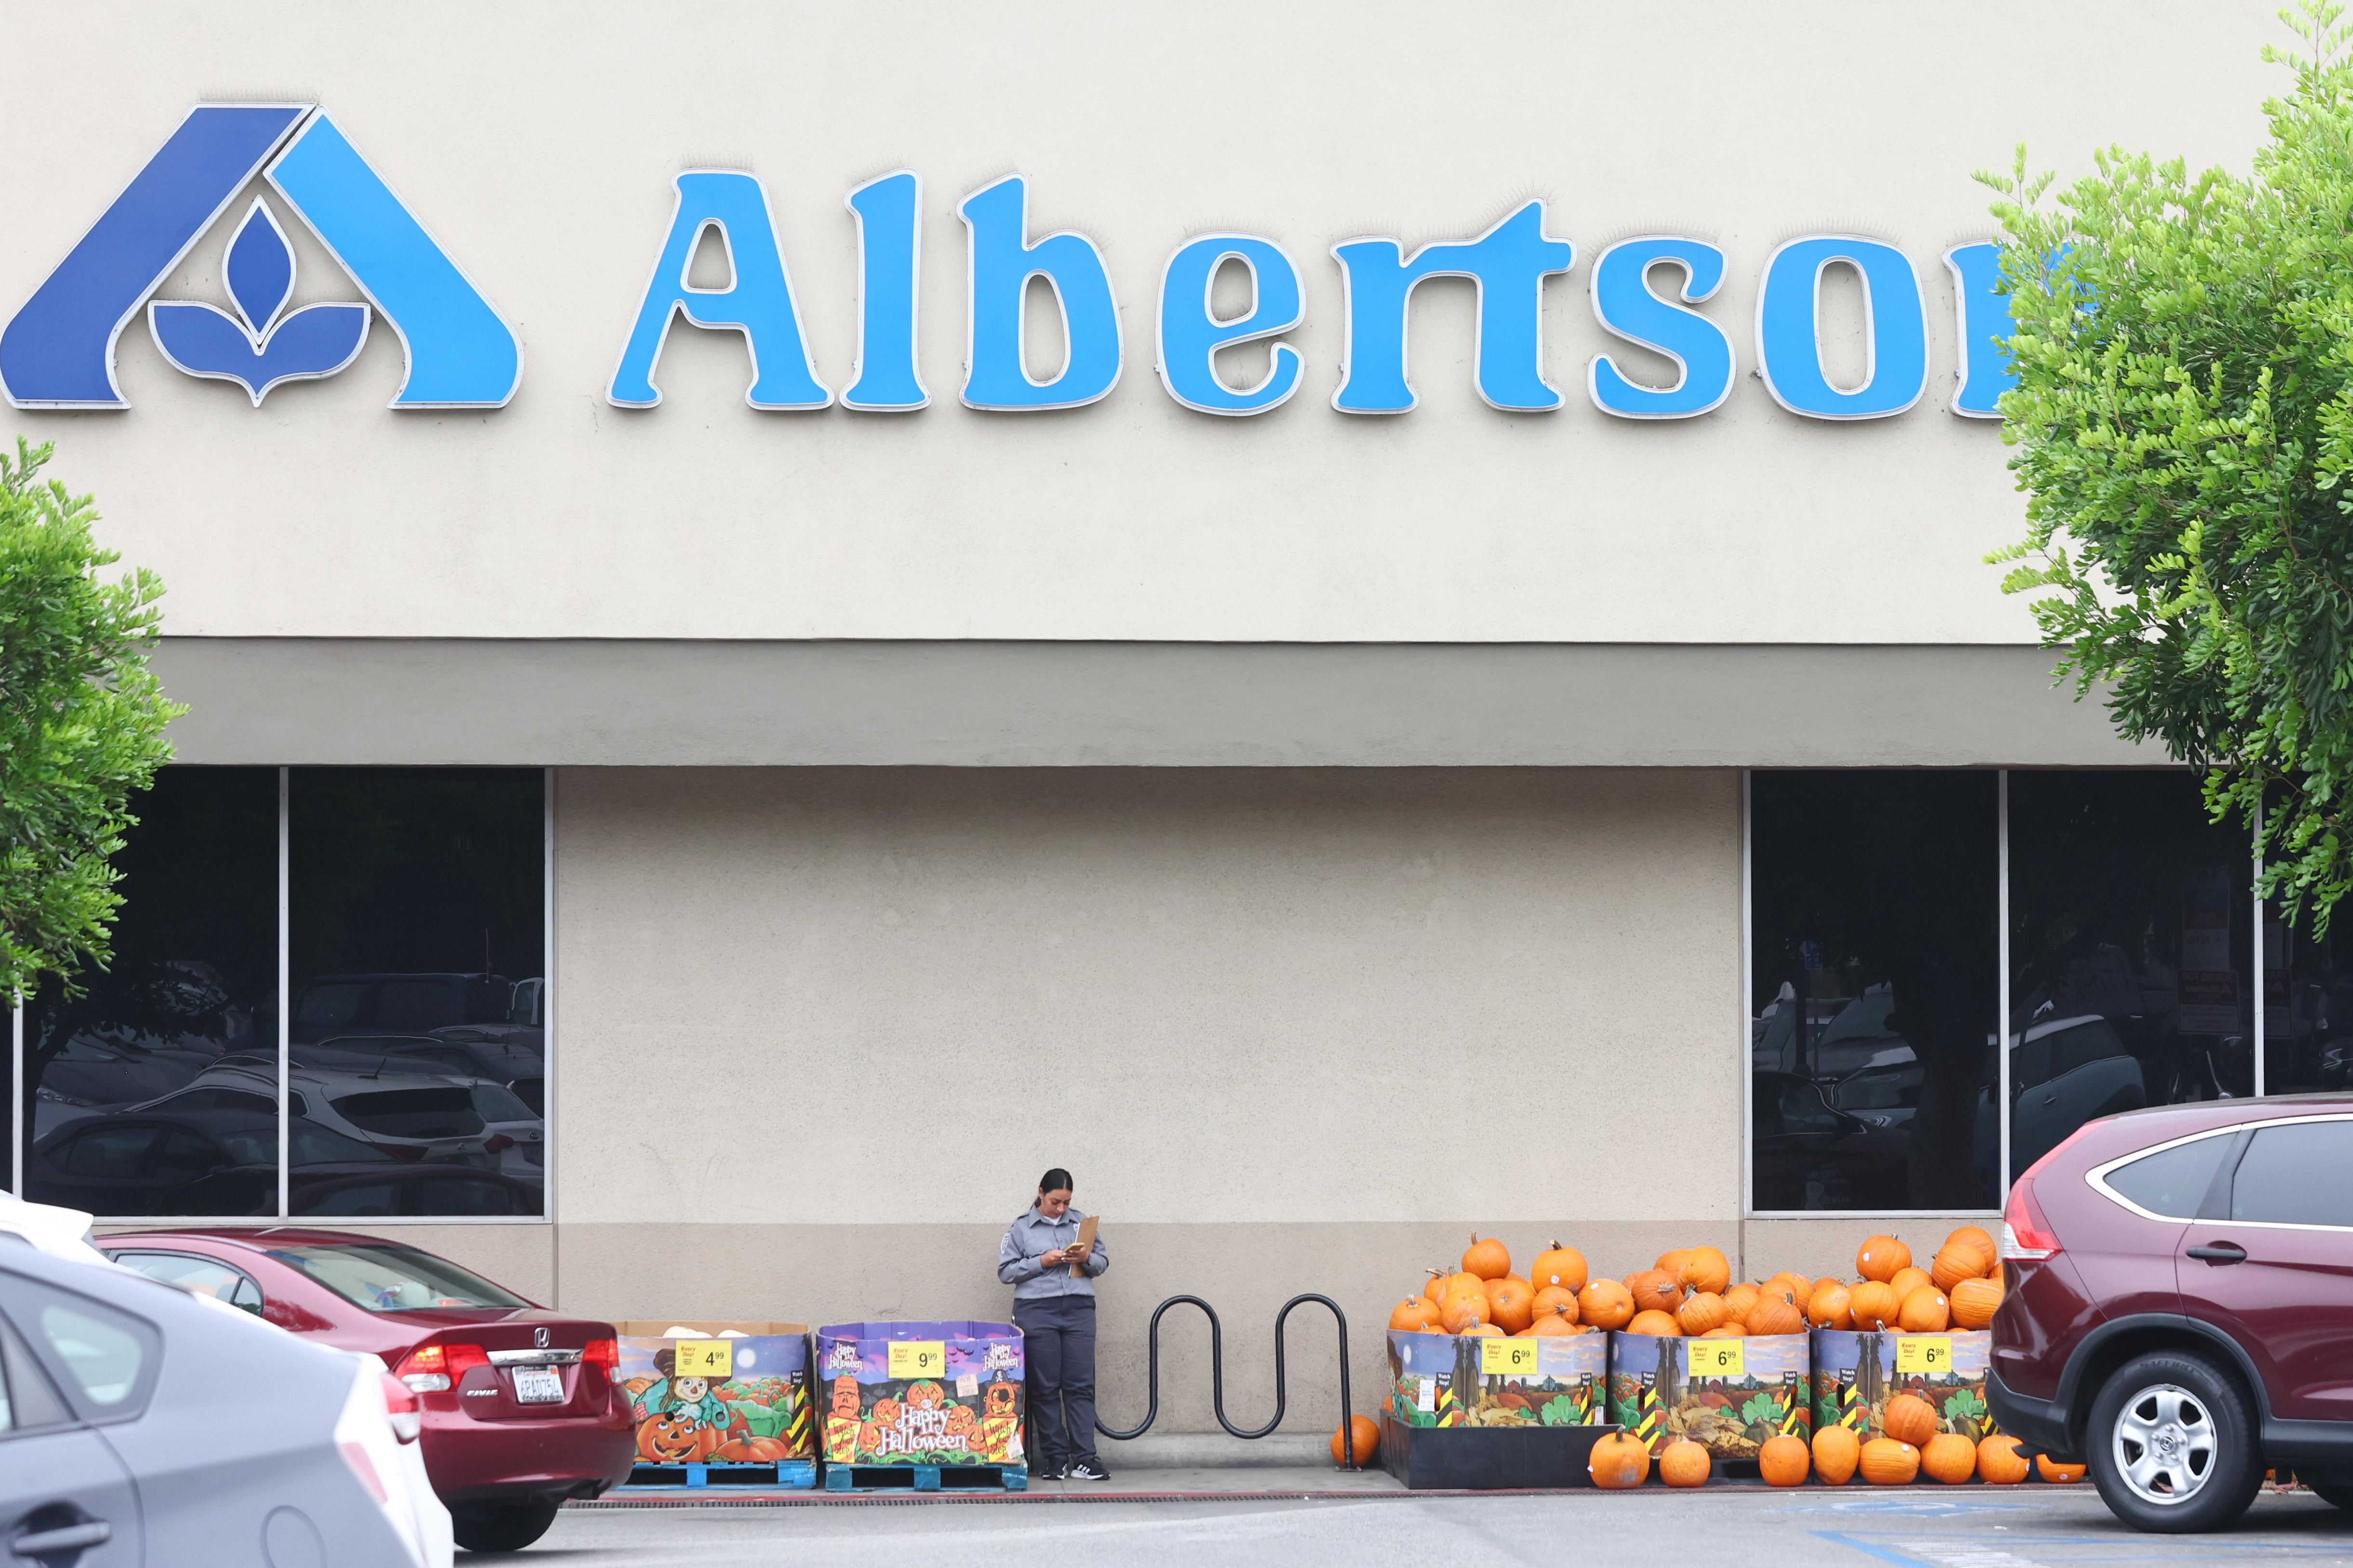 LOS ANGELES, CALIFORNIA - OCTOBER 14: The Albertsons logo is displayed in front of an Albertsons grocery store on October 14, 2022 in Los Angeles, California. Top grocery retailer Kroger has agreed to acquire rival Albertsons for $24.6 billion. (Photo by Mario Tama/Getty Images)